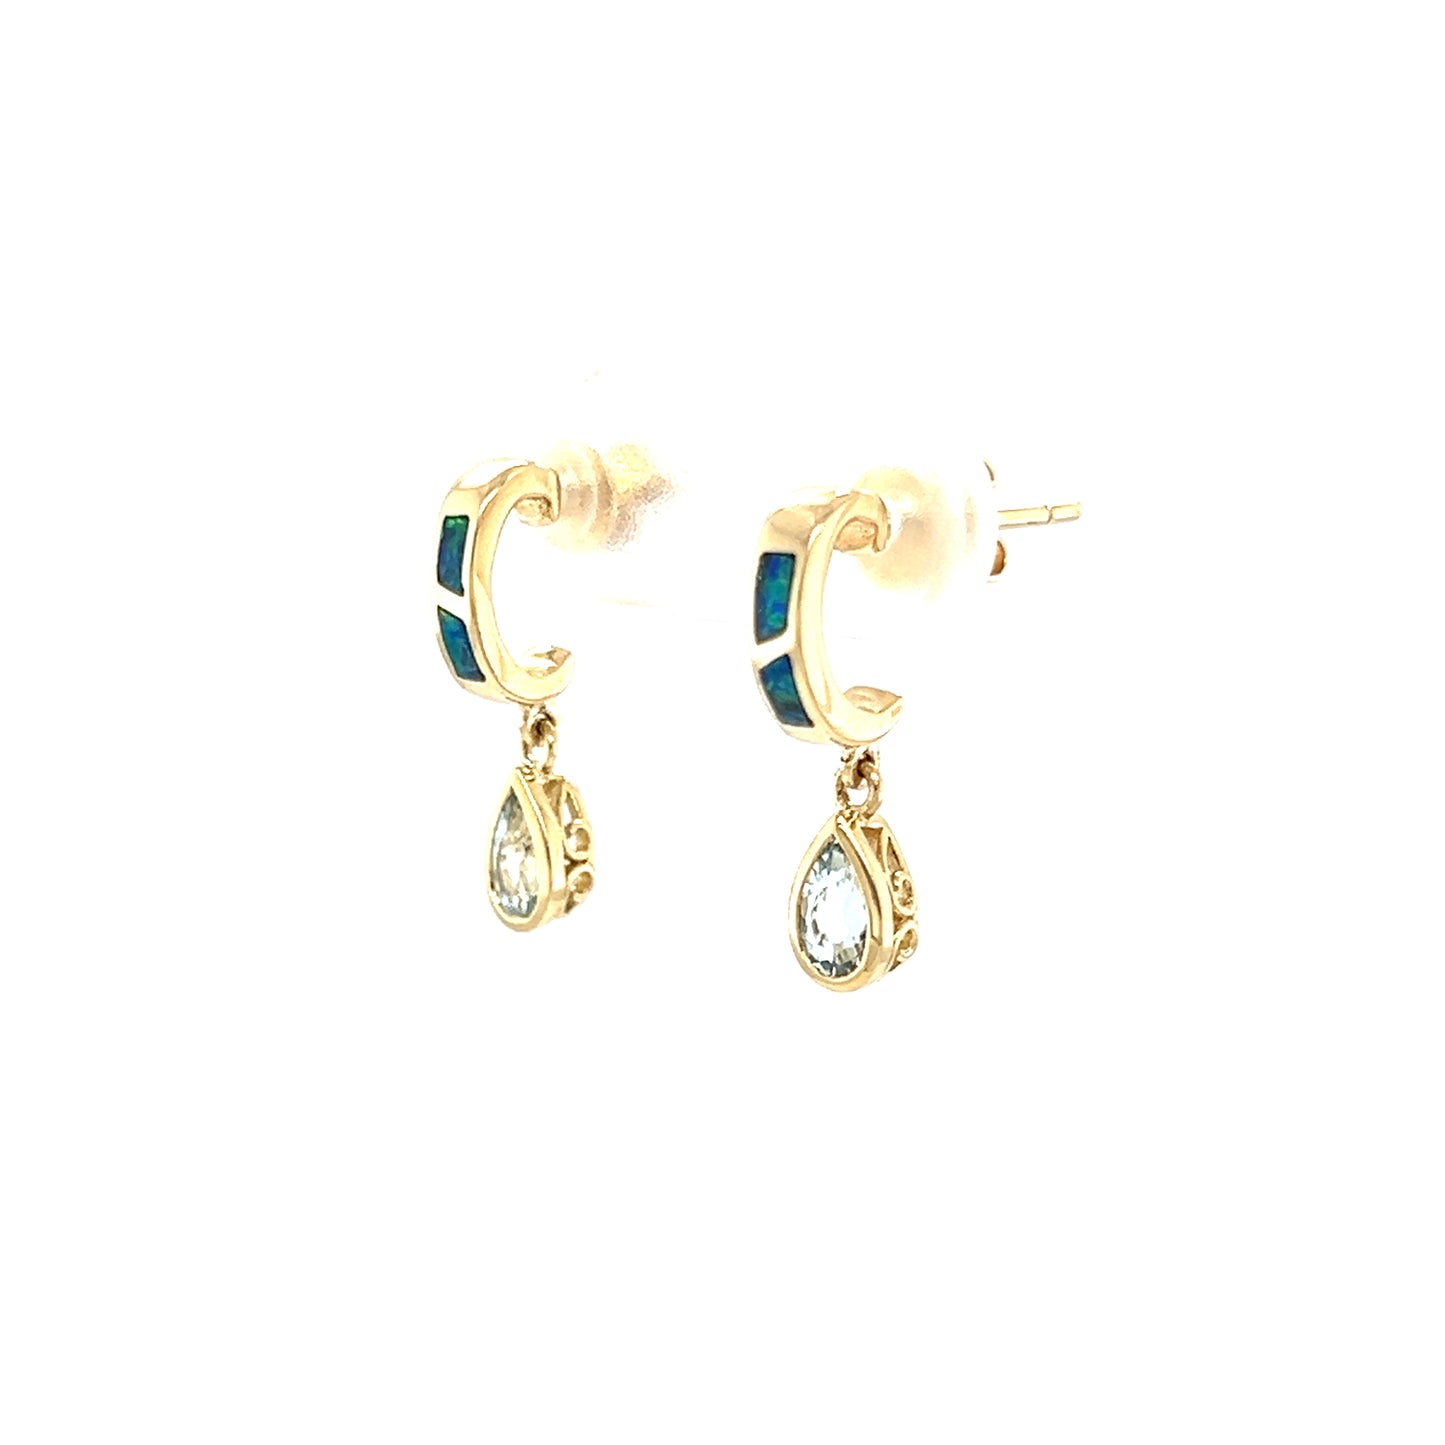 Black Opal C-Hoop Earrings with 0.51ctw of Aquamarine in 14K Yellow Gold Right Side View